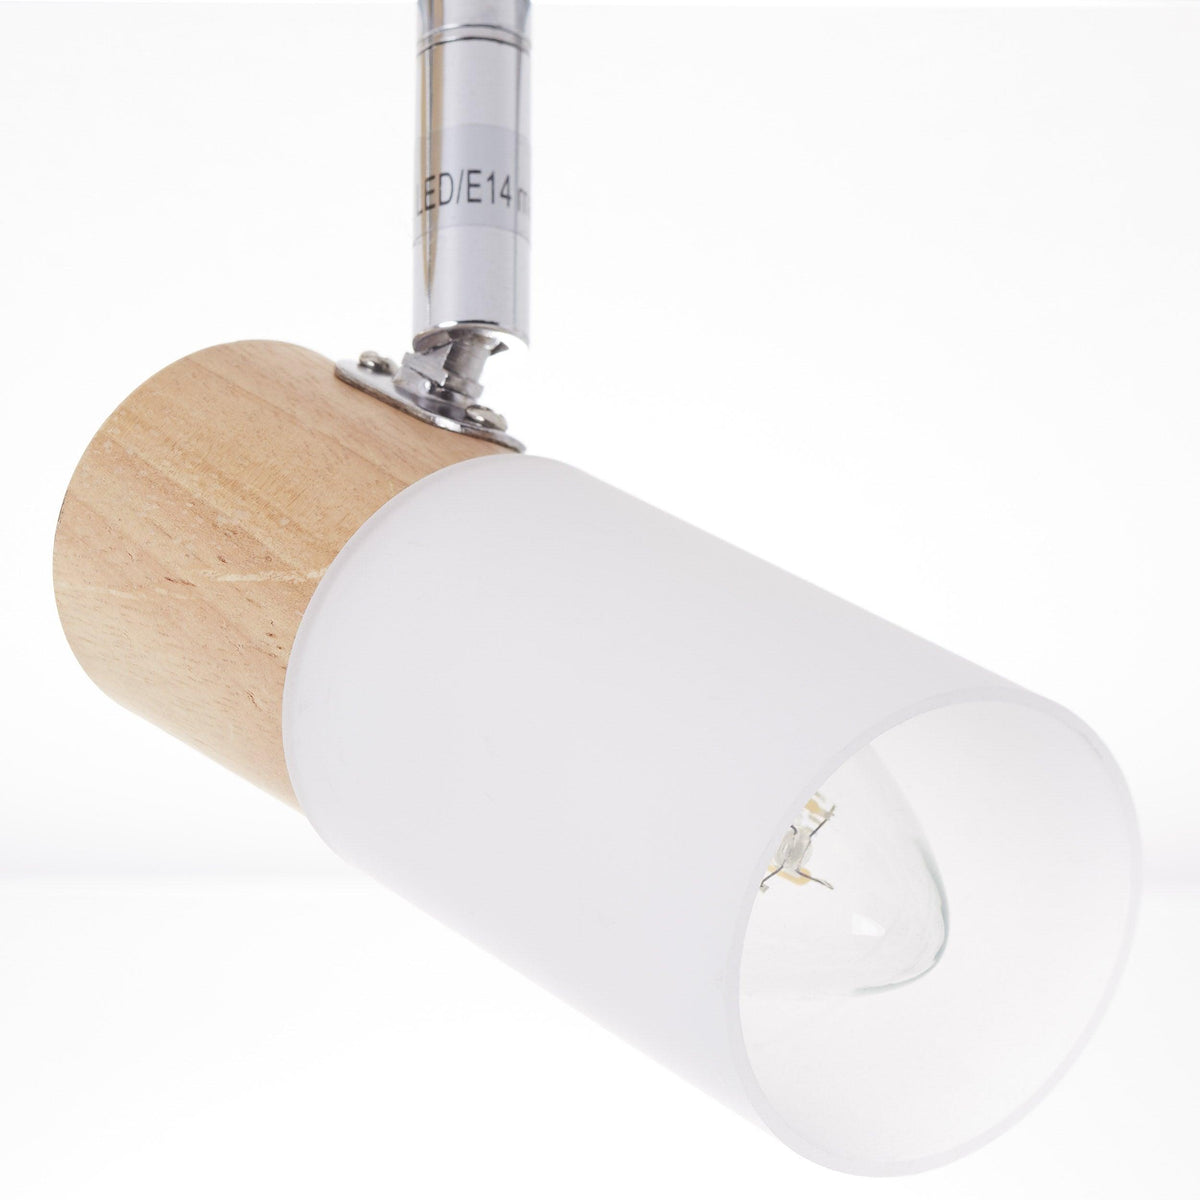 Brilliant 3 Light 10.5W Babsan Round Spotlight - Wood Light &amp; White | 51434/50 from DID Electrical - guaranteed Irish, guaranteed quality service. (6977595605180)